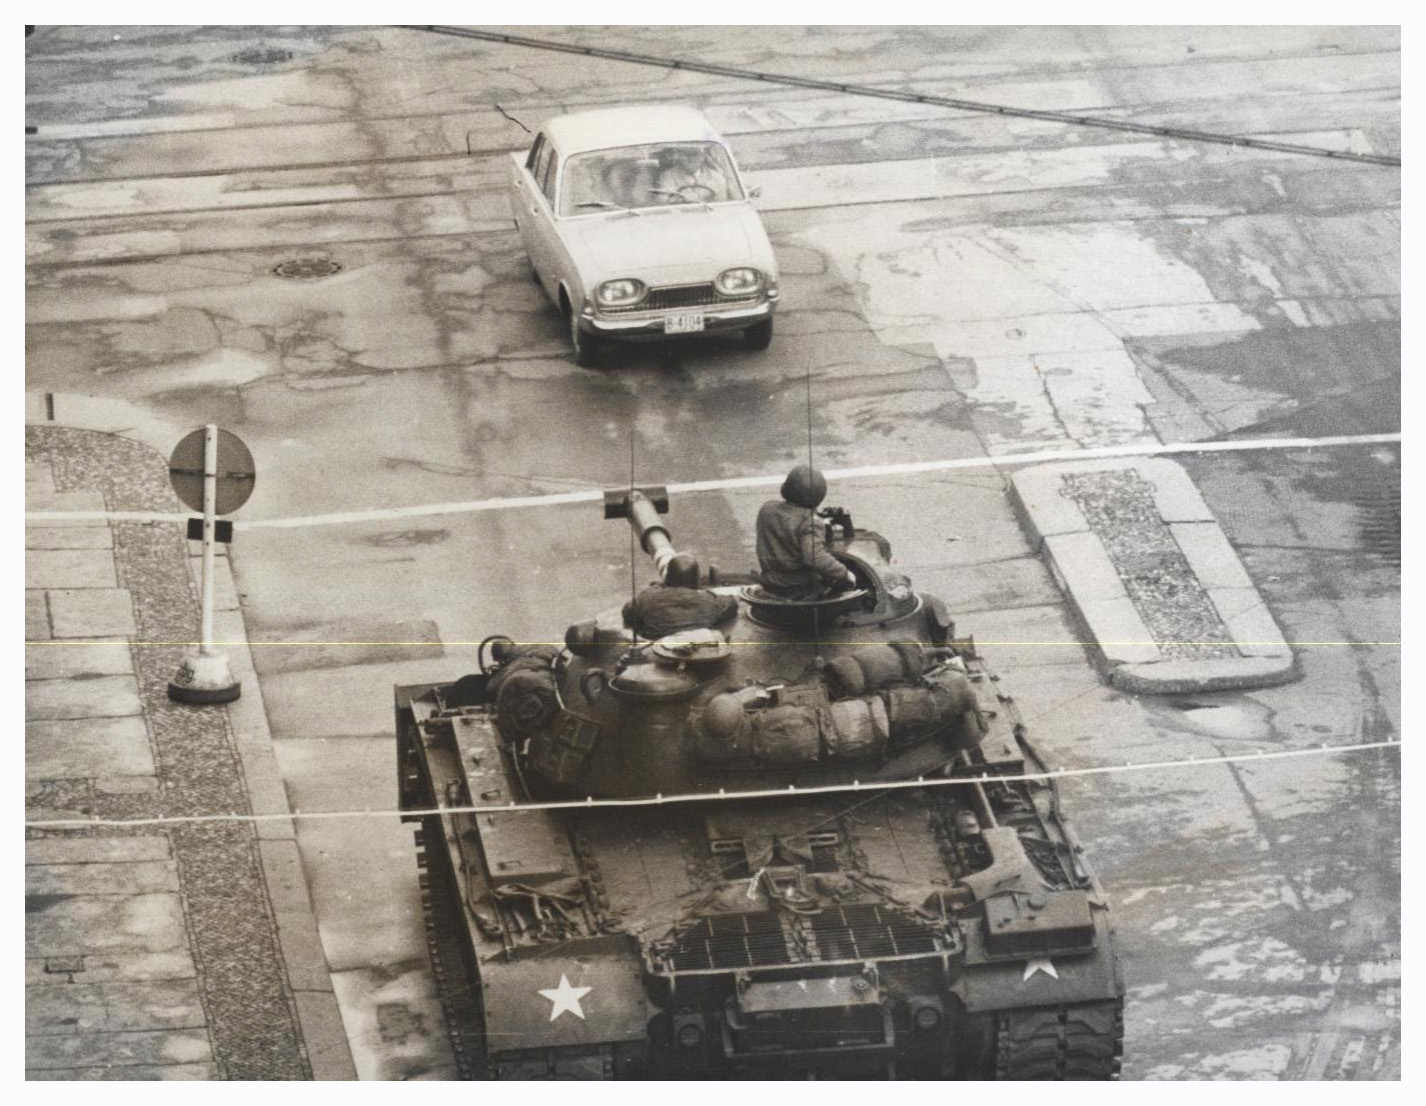 American tank crew,Checkpoint Charlie,soldiers,tank,D Budnik,Berlin,Germany,1961 